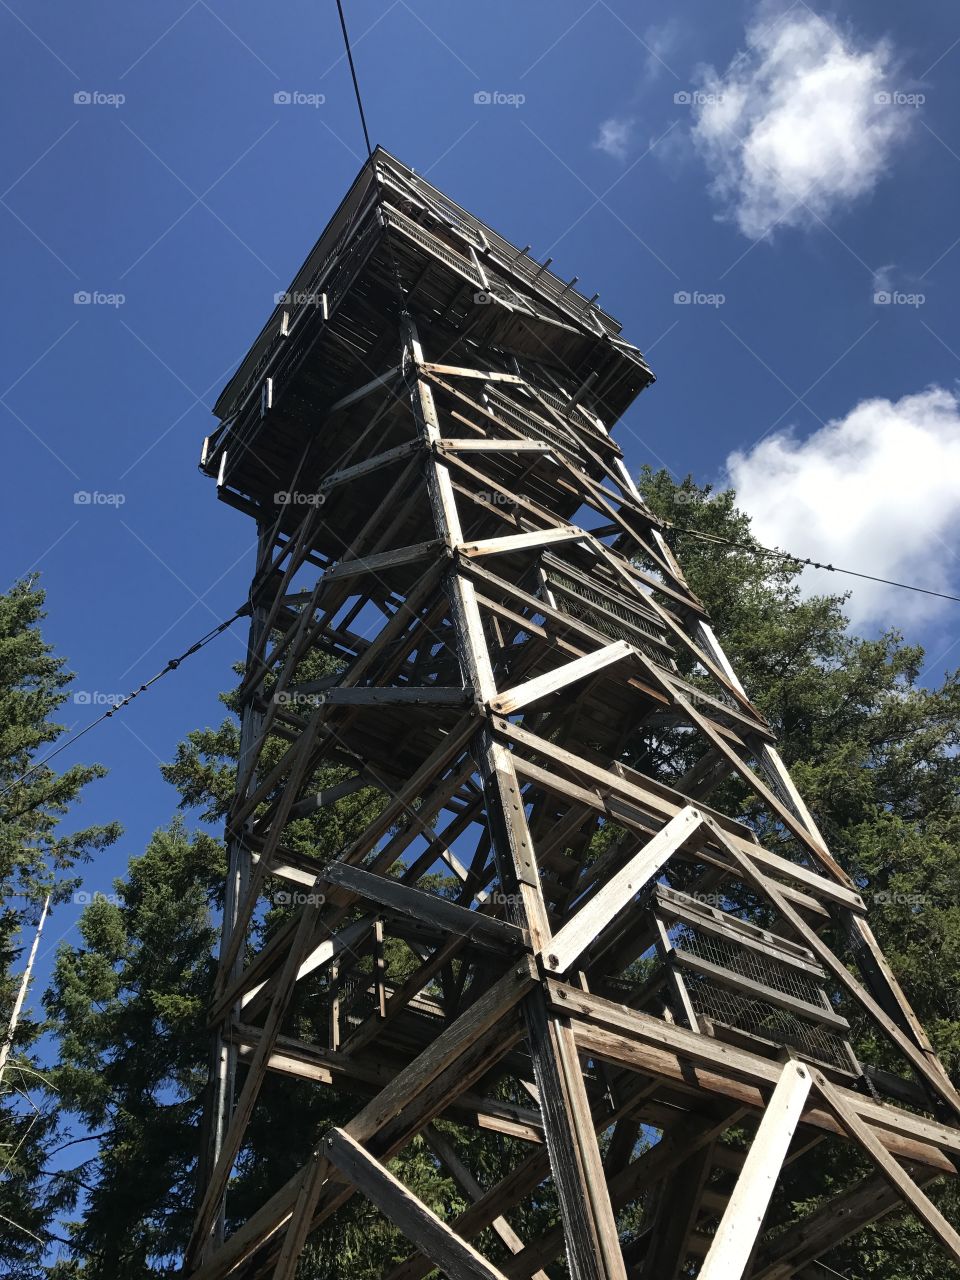 Hiking lookout tower
